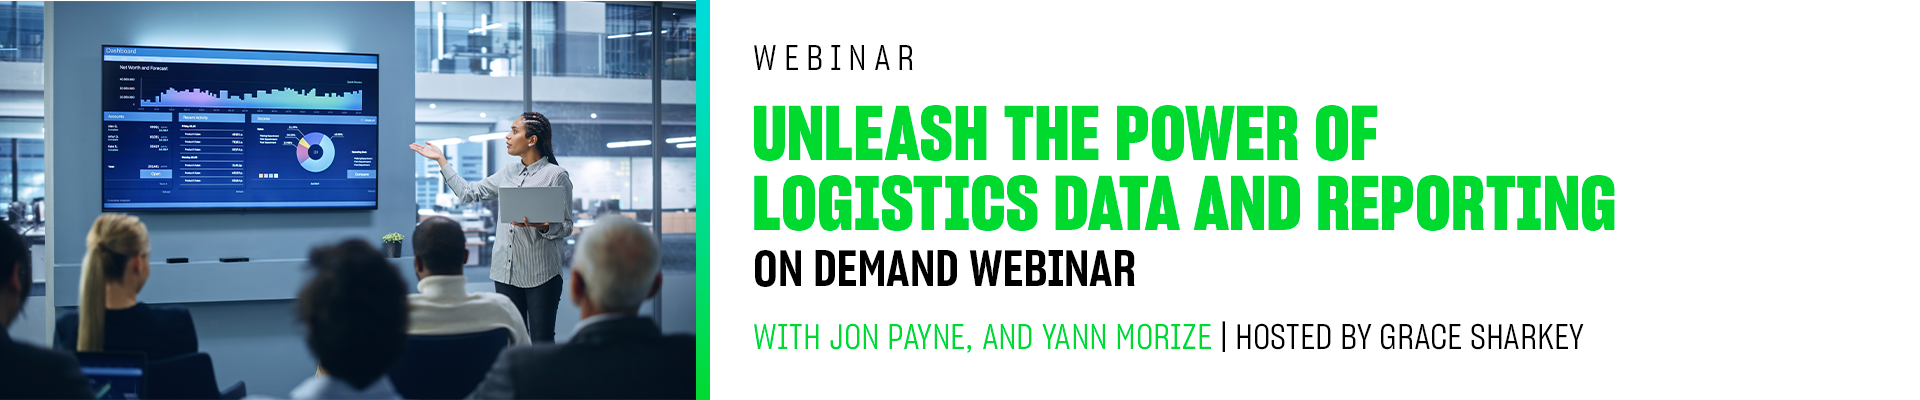 Recorded Webinar - Unleash the Power of Logistics Data and Reporting